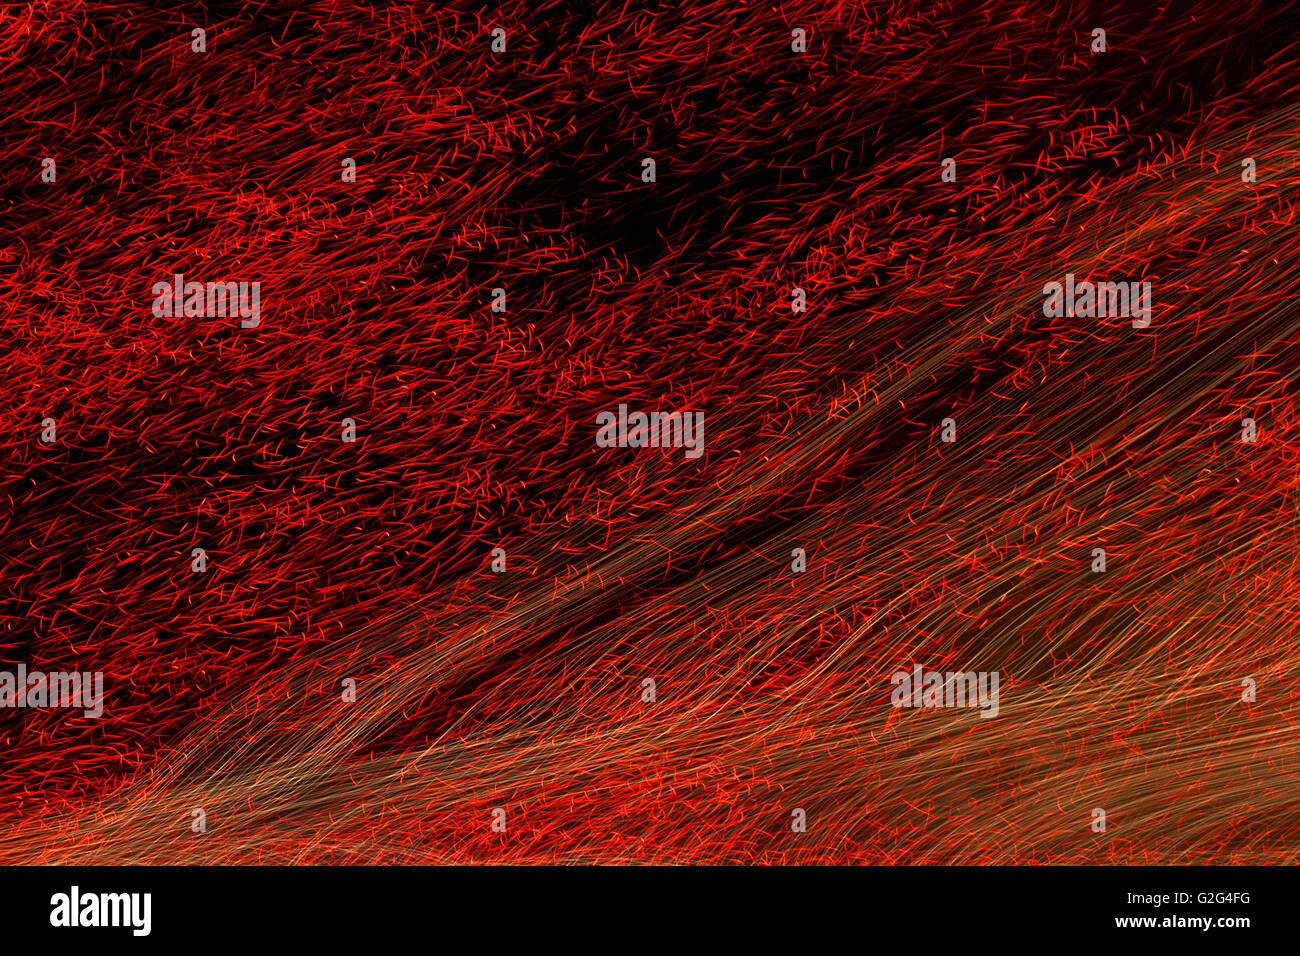 Blurred Red Lights Abstract Stock Photo